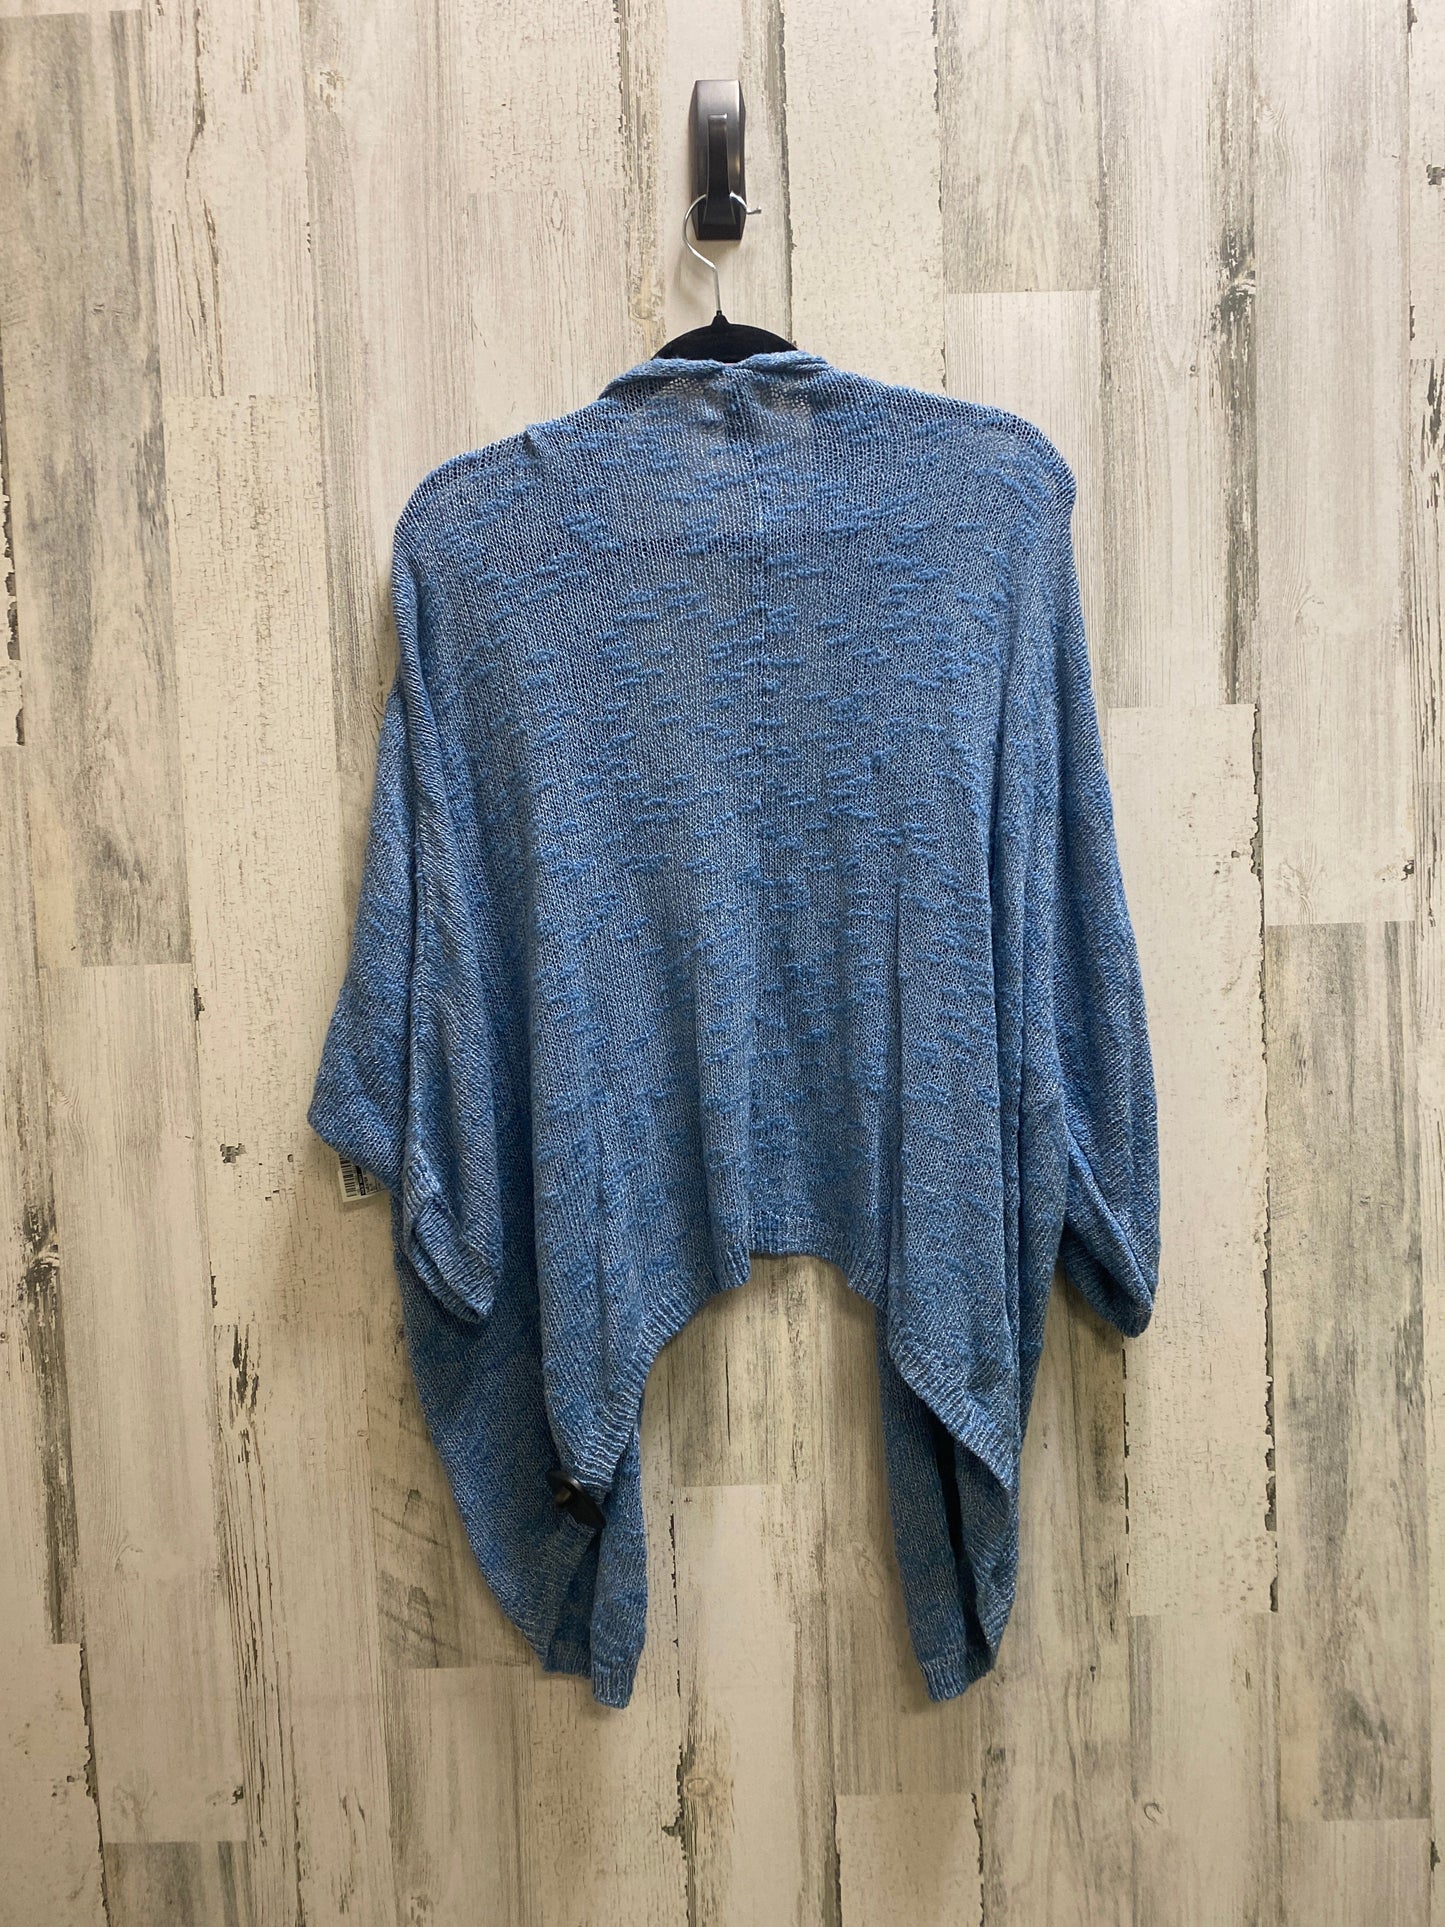 Sweater Cardigan By Old Navy  Size: 2x